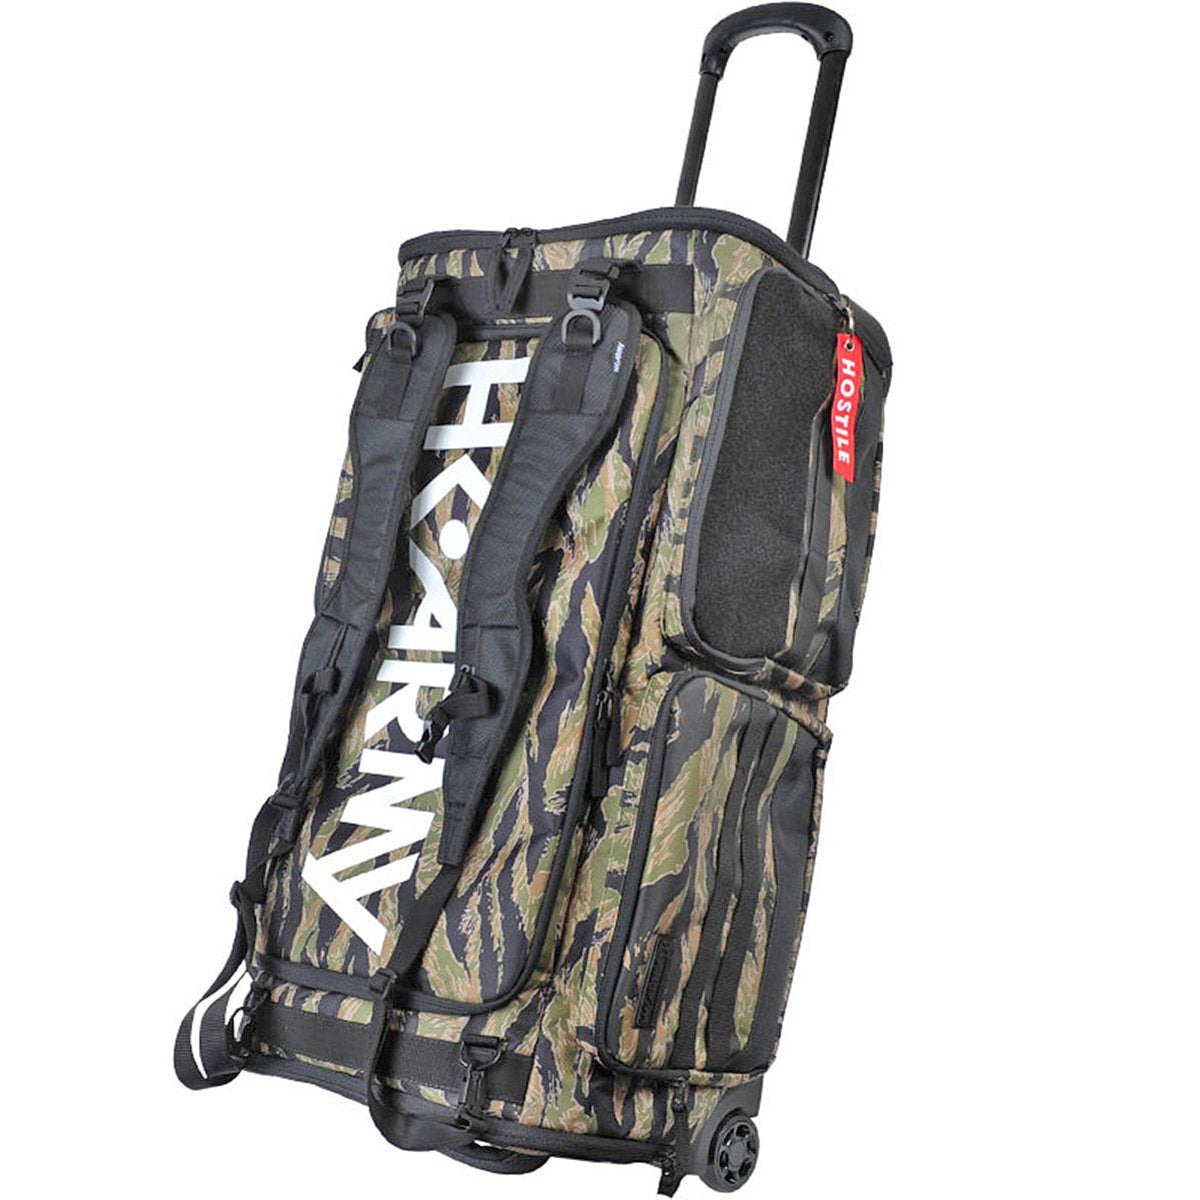 Expand 75L - Roller Gear Bag - Tiger | Paintball Gear Bag | Hk Army